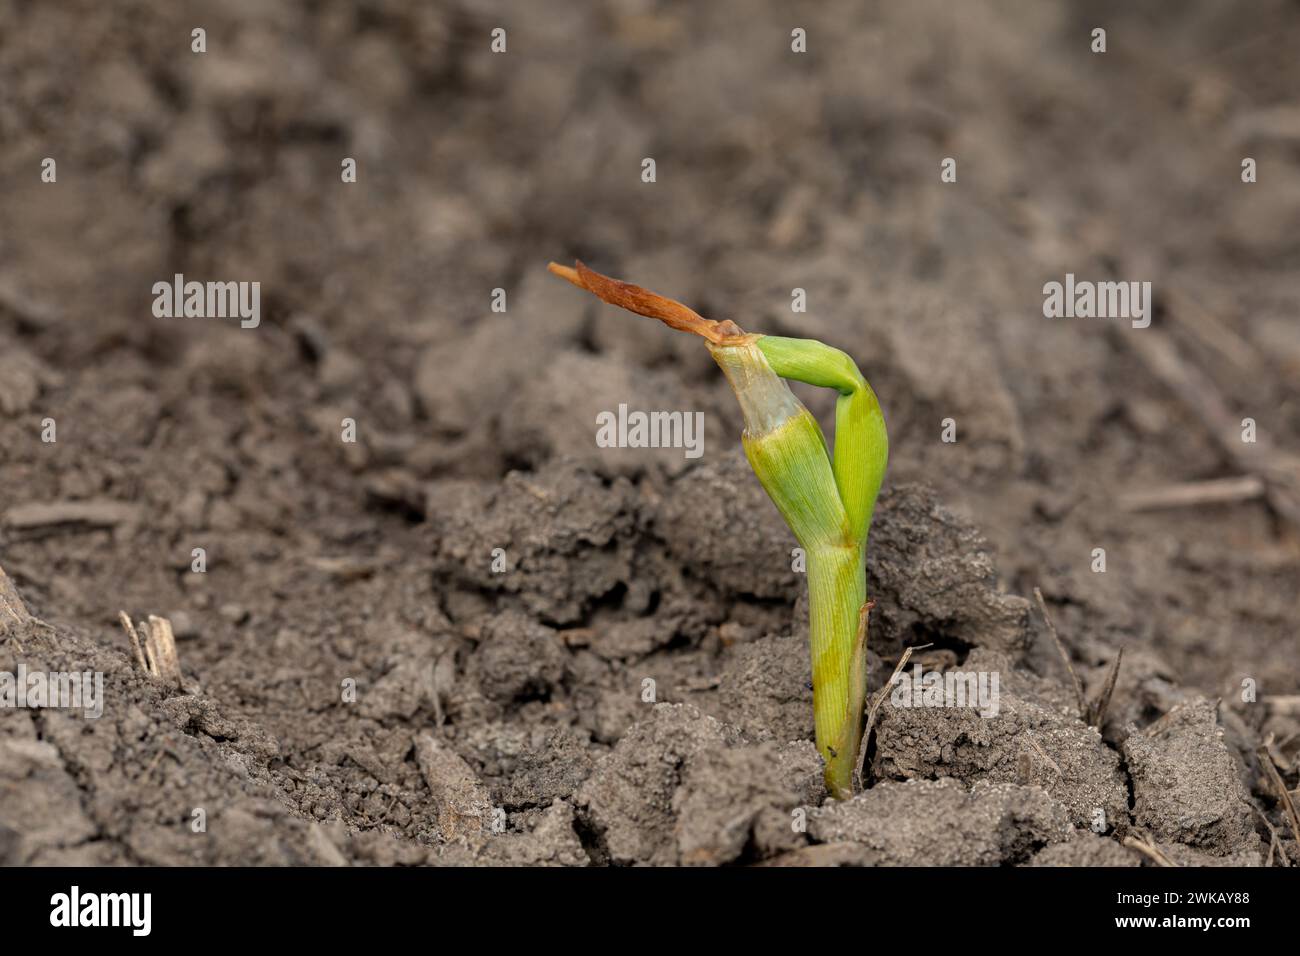 Young corn plant with leaf deformity or buggy whipping from frost damage. Corn plant health, stress and weather damage concept. Stock Photo